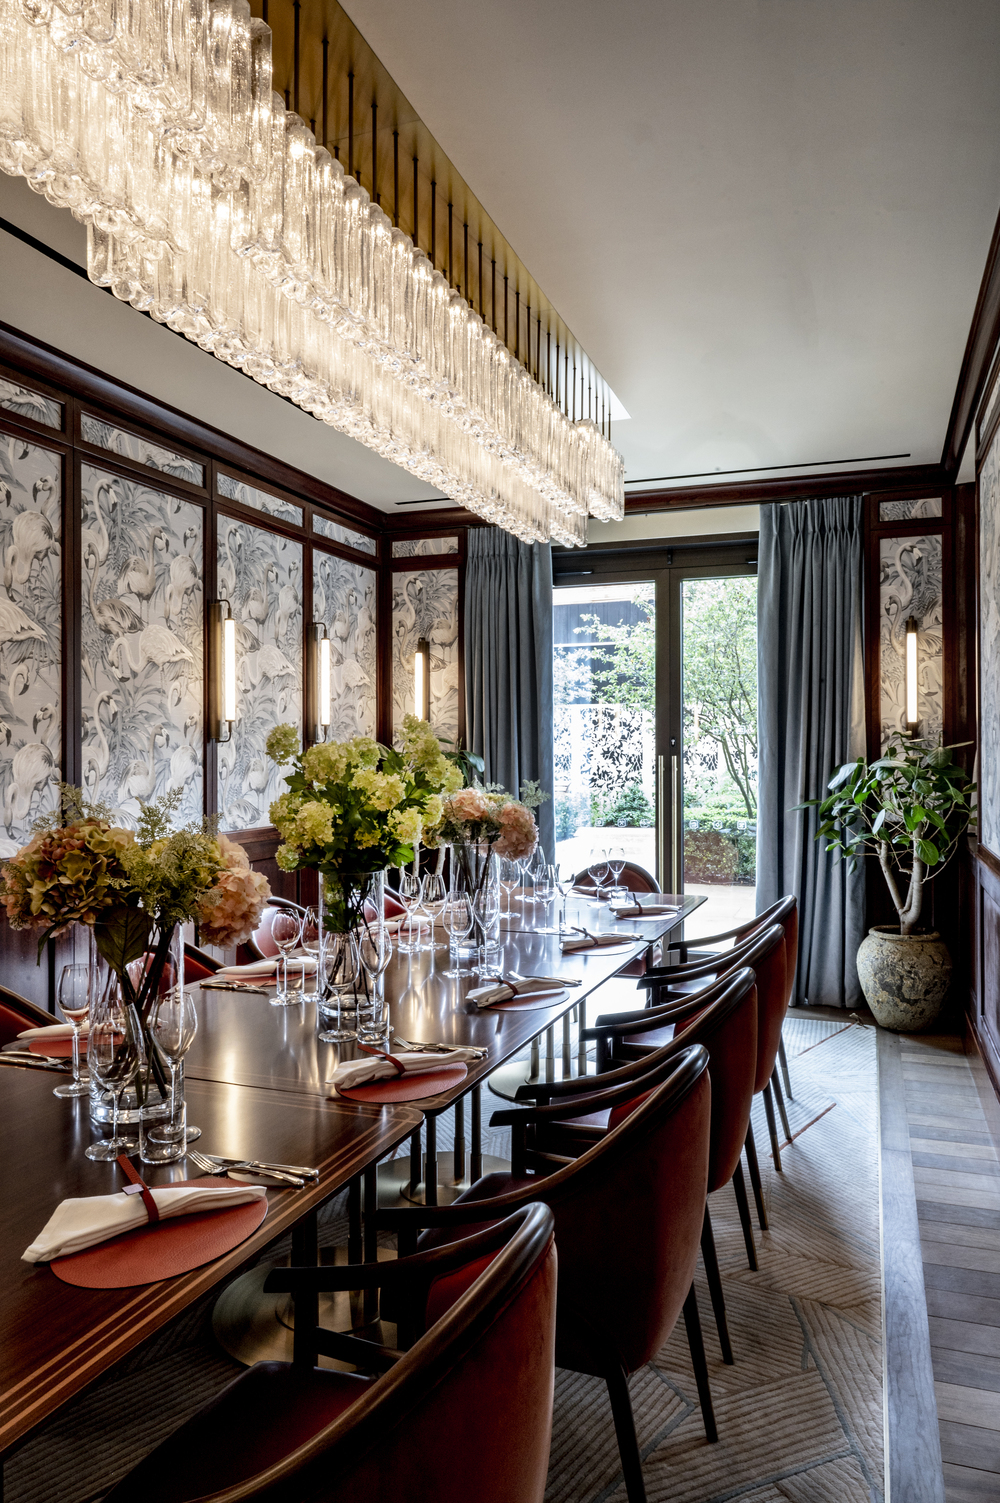 Luxurious private dining room with chandelier